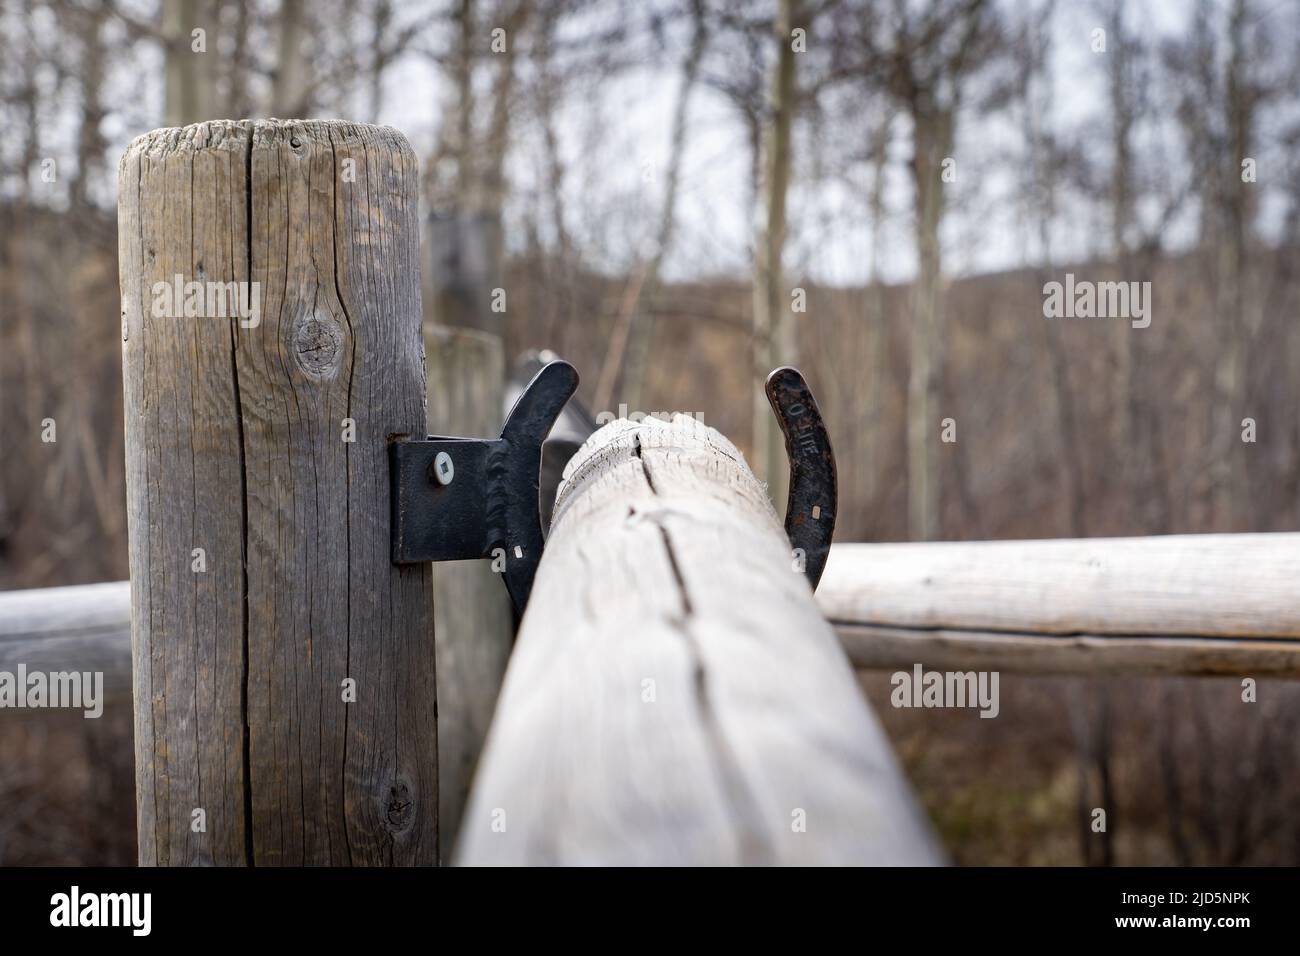 A wooden post and rail fence held together with horse shoes at Glenbow Ranch Provincial Park Canada. Stock Photo